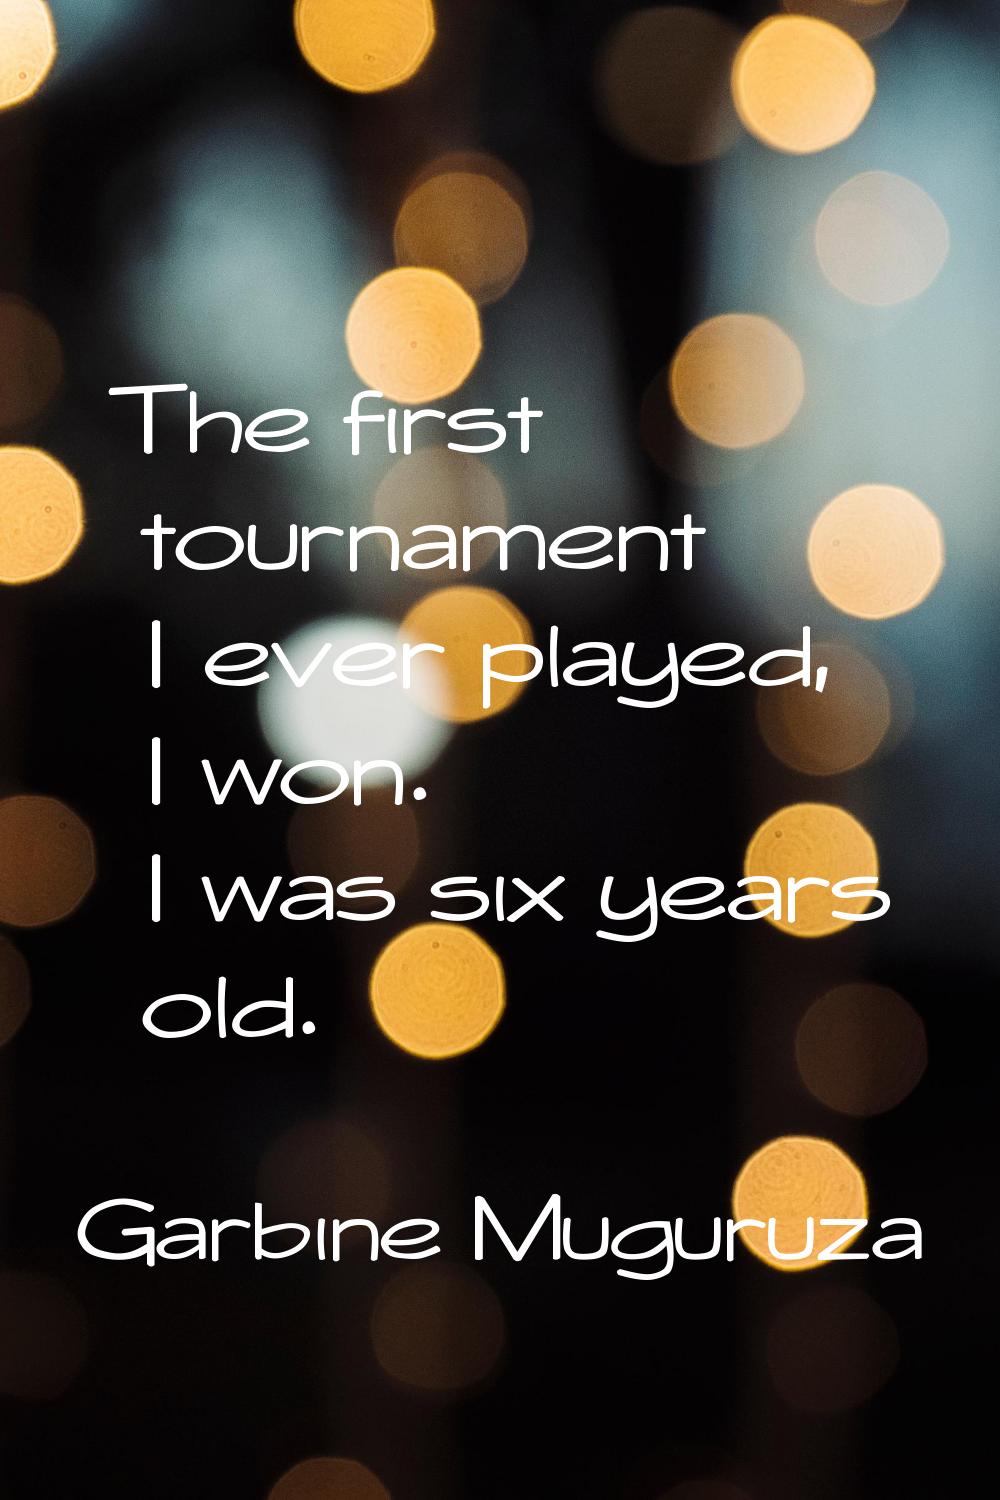 The first tournament I ever played, I won. I was six years old.